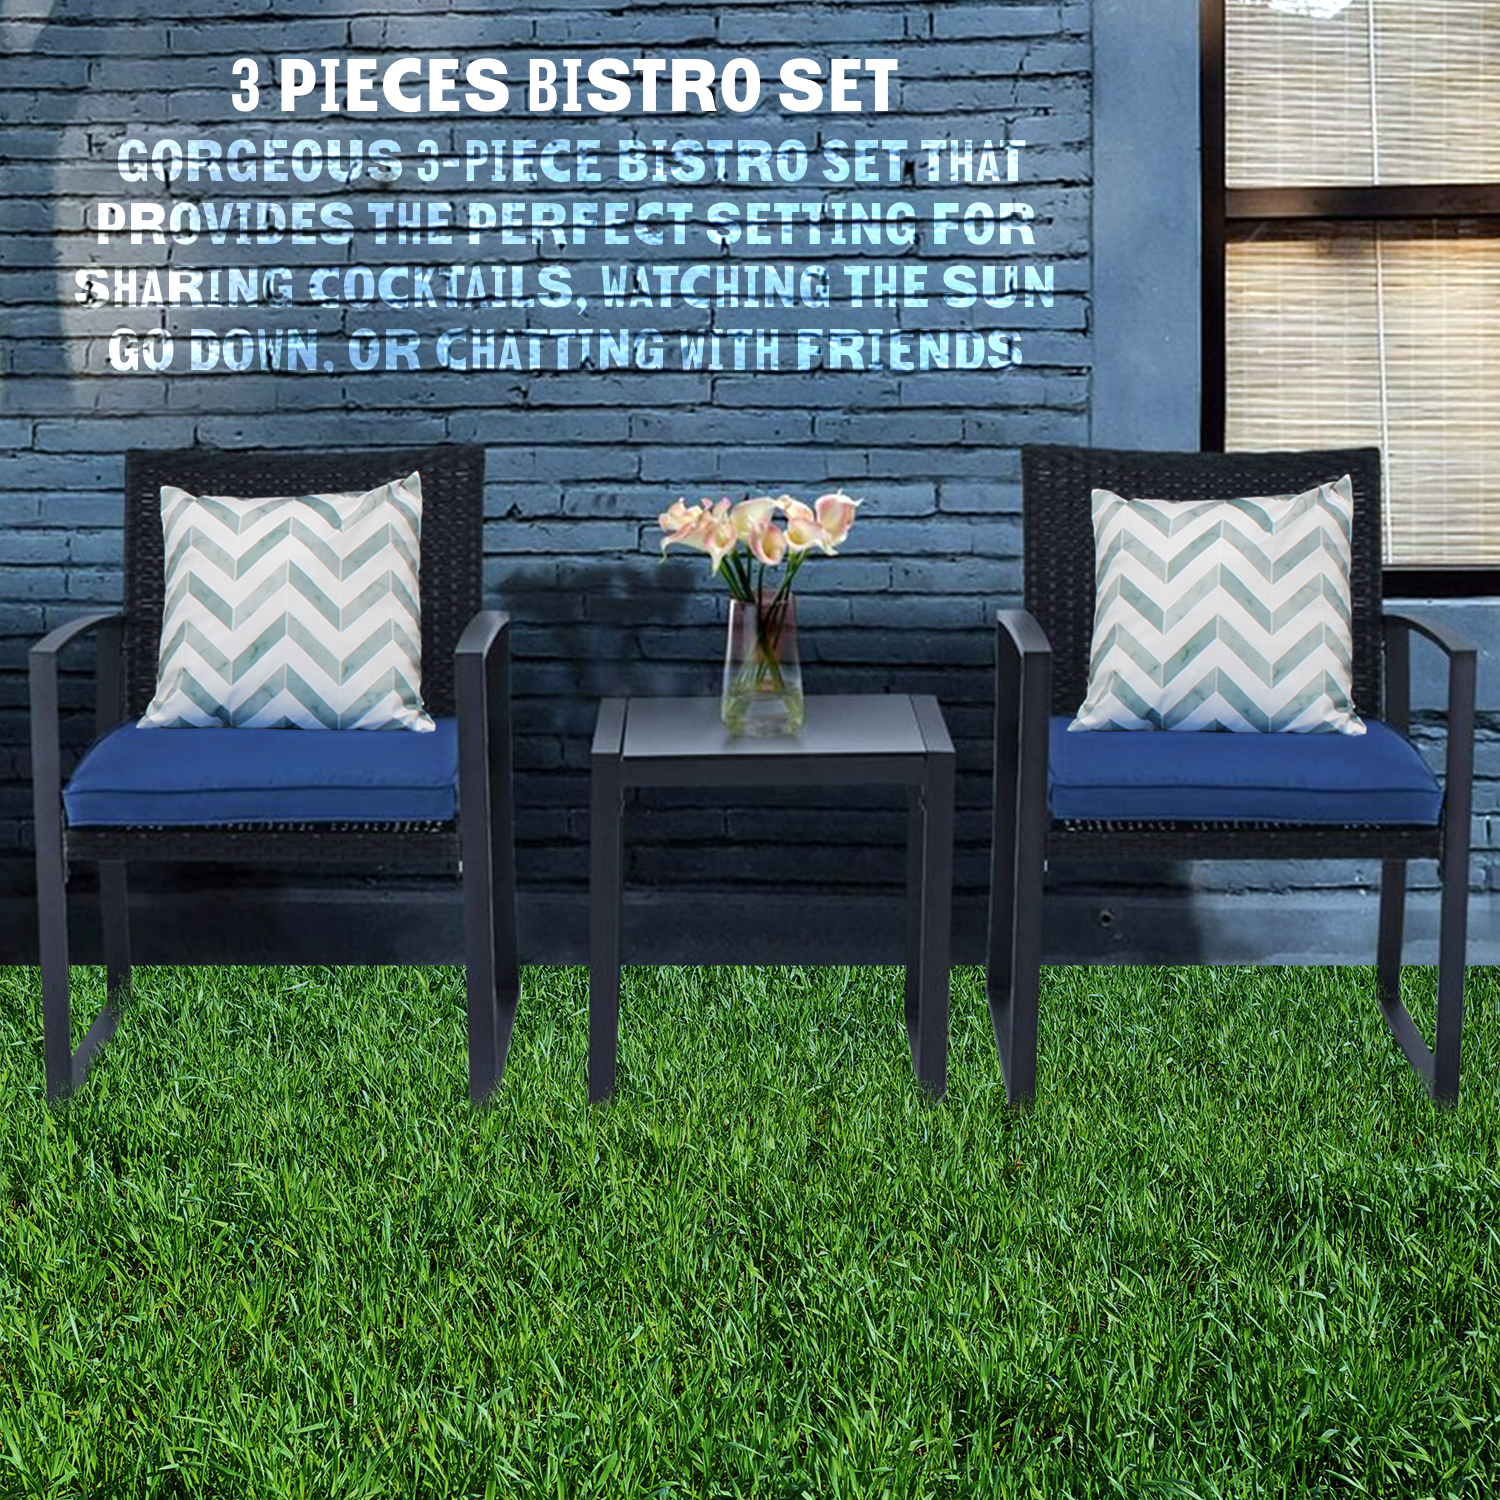 3 Pieces recreational Wicker garden furniture Sets Modern Bistro Set Rattan Chair dialogue Sets with Yard and Bistro Coffee Table - image 5 of 7